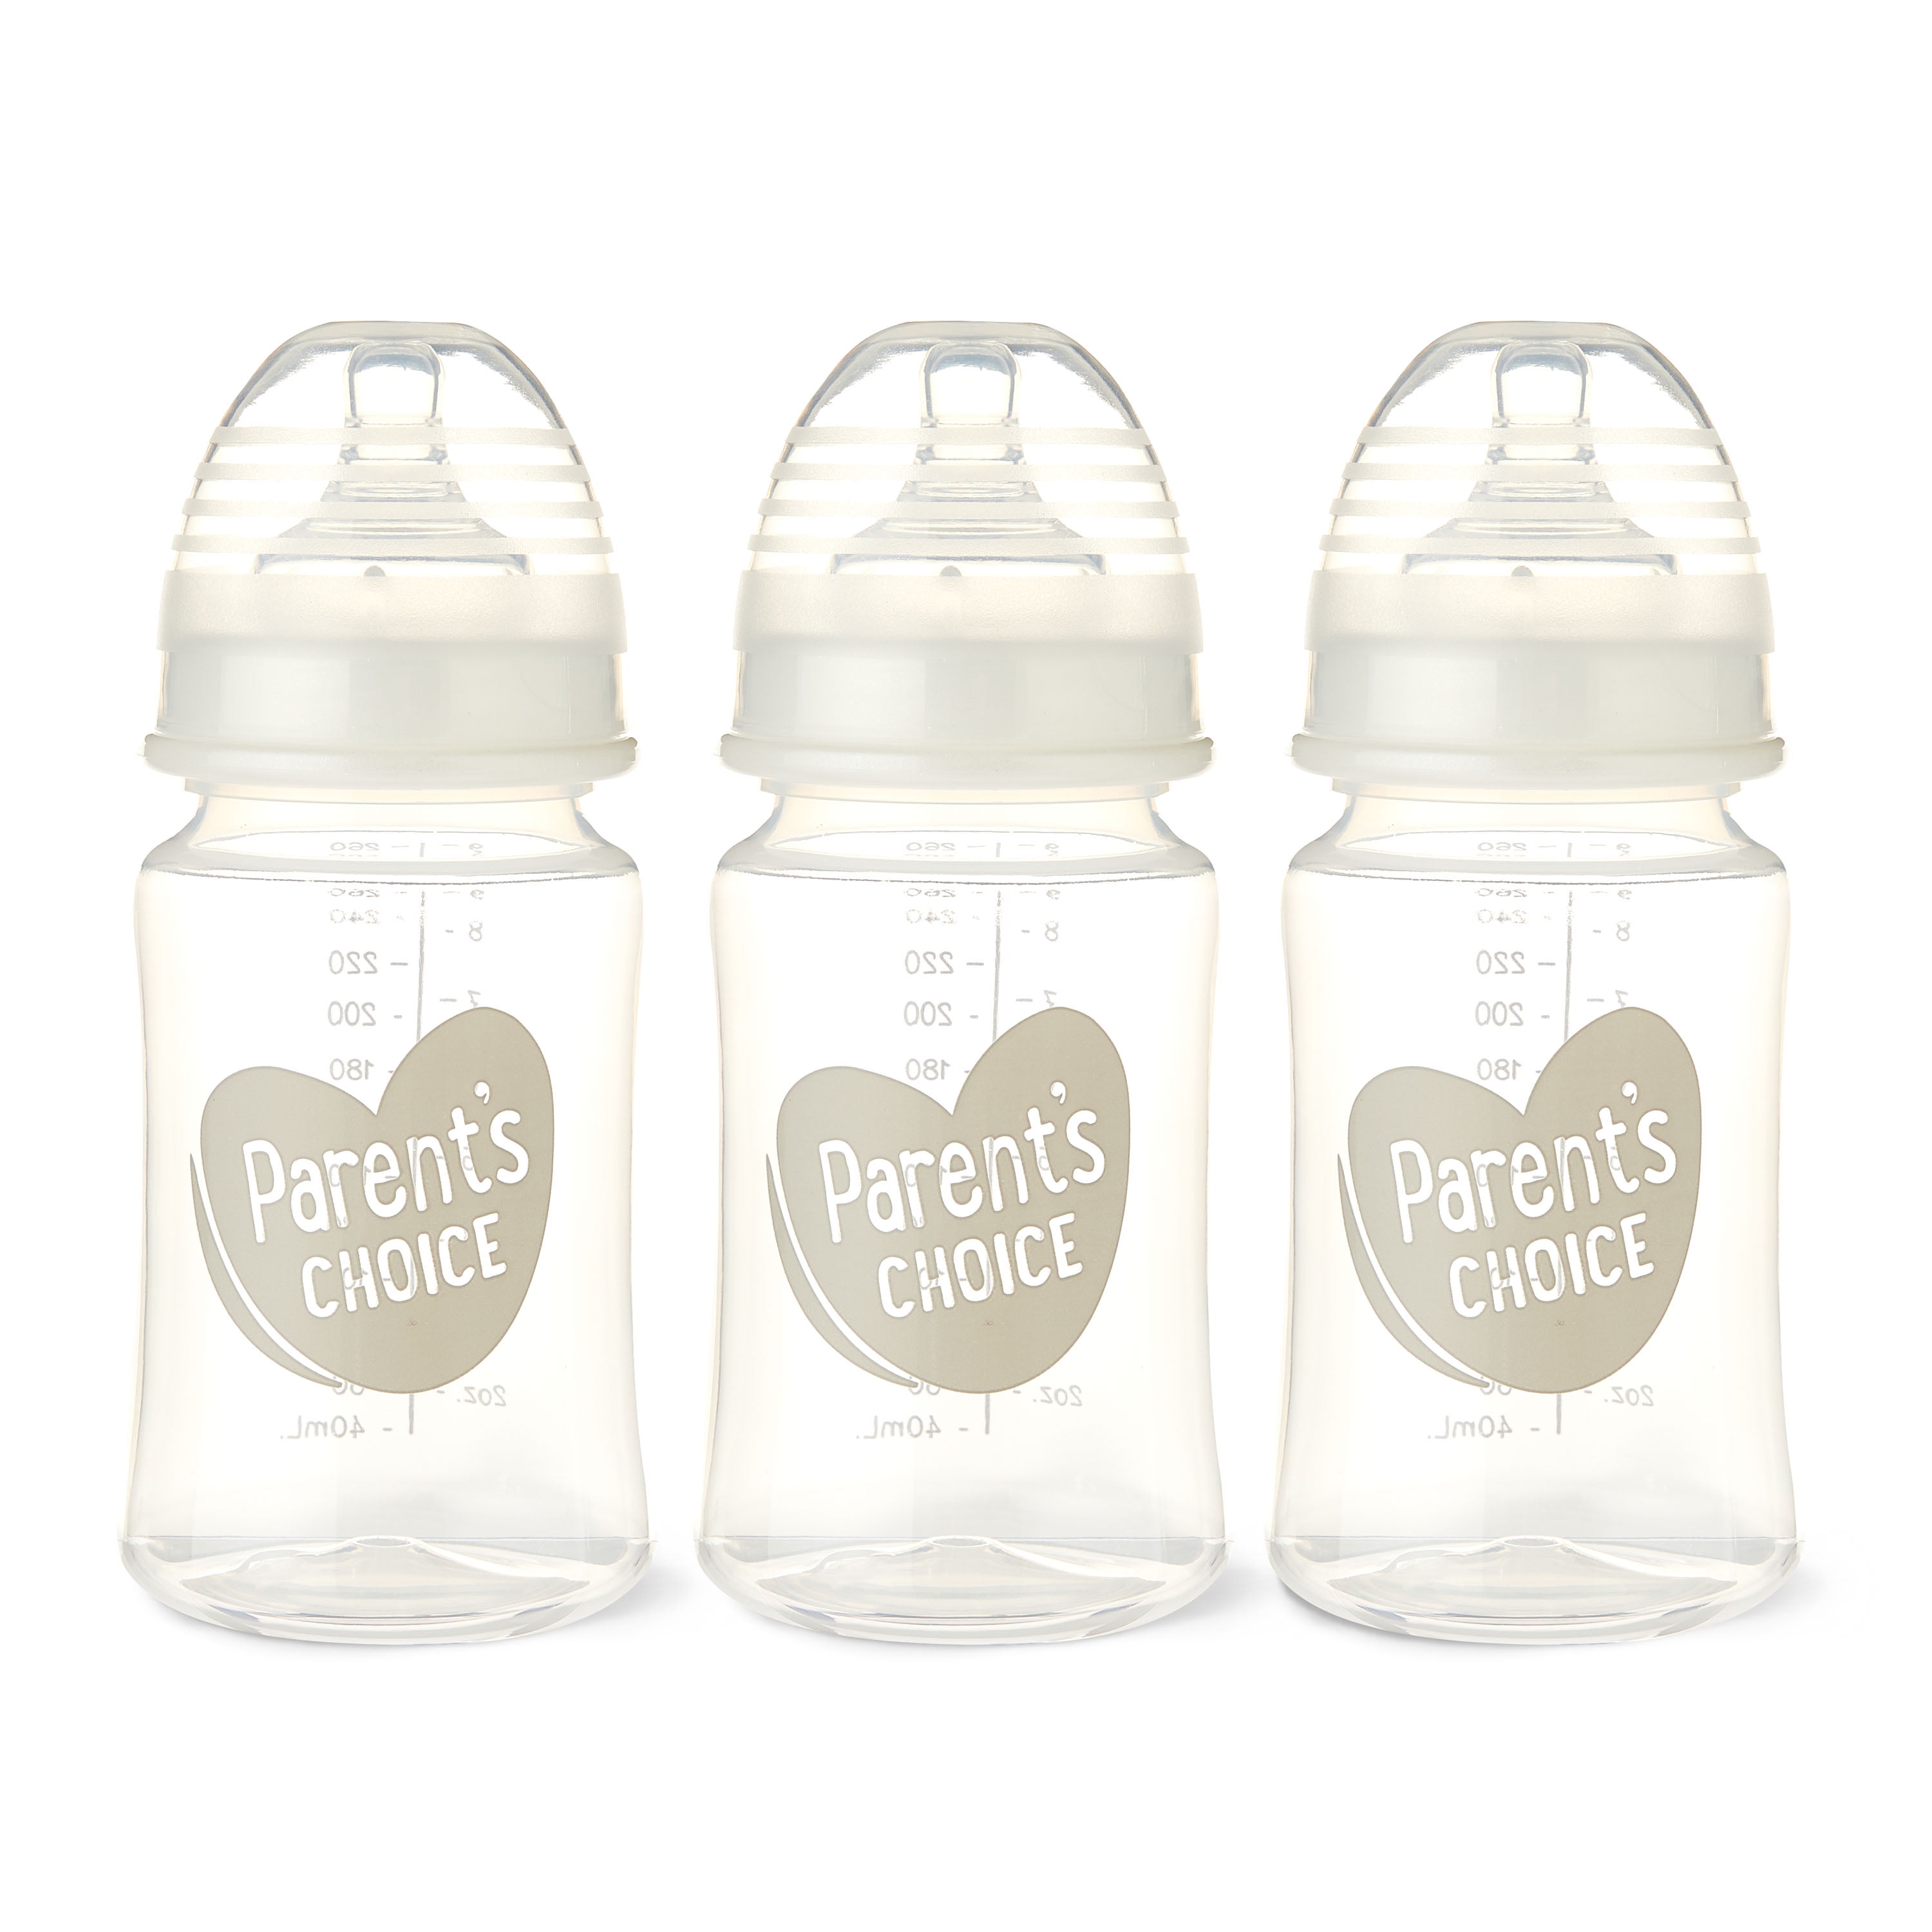 Philips Avent Natural Baby Bottle with Natural Response Nipple, Clear, 4oz,  3pk, SCY900/93 